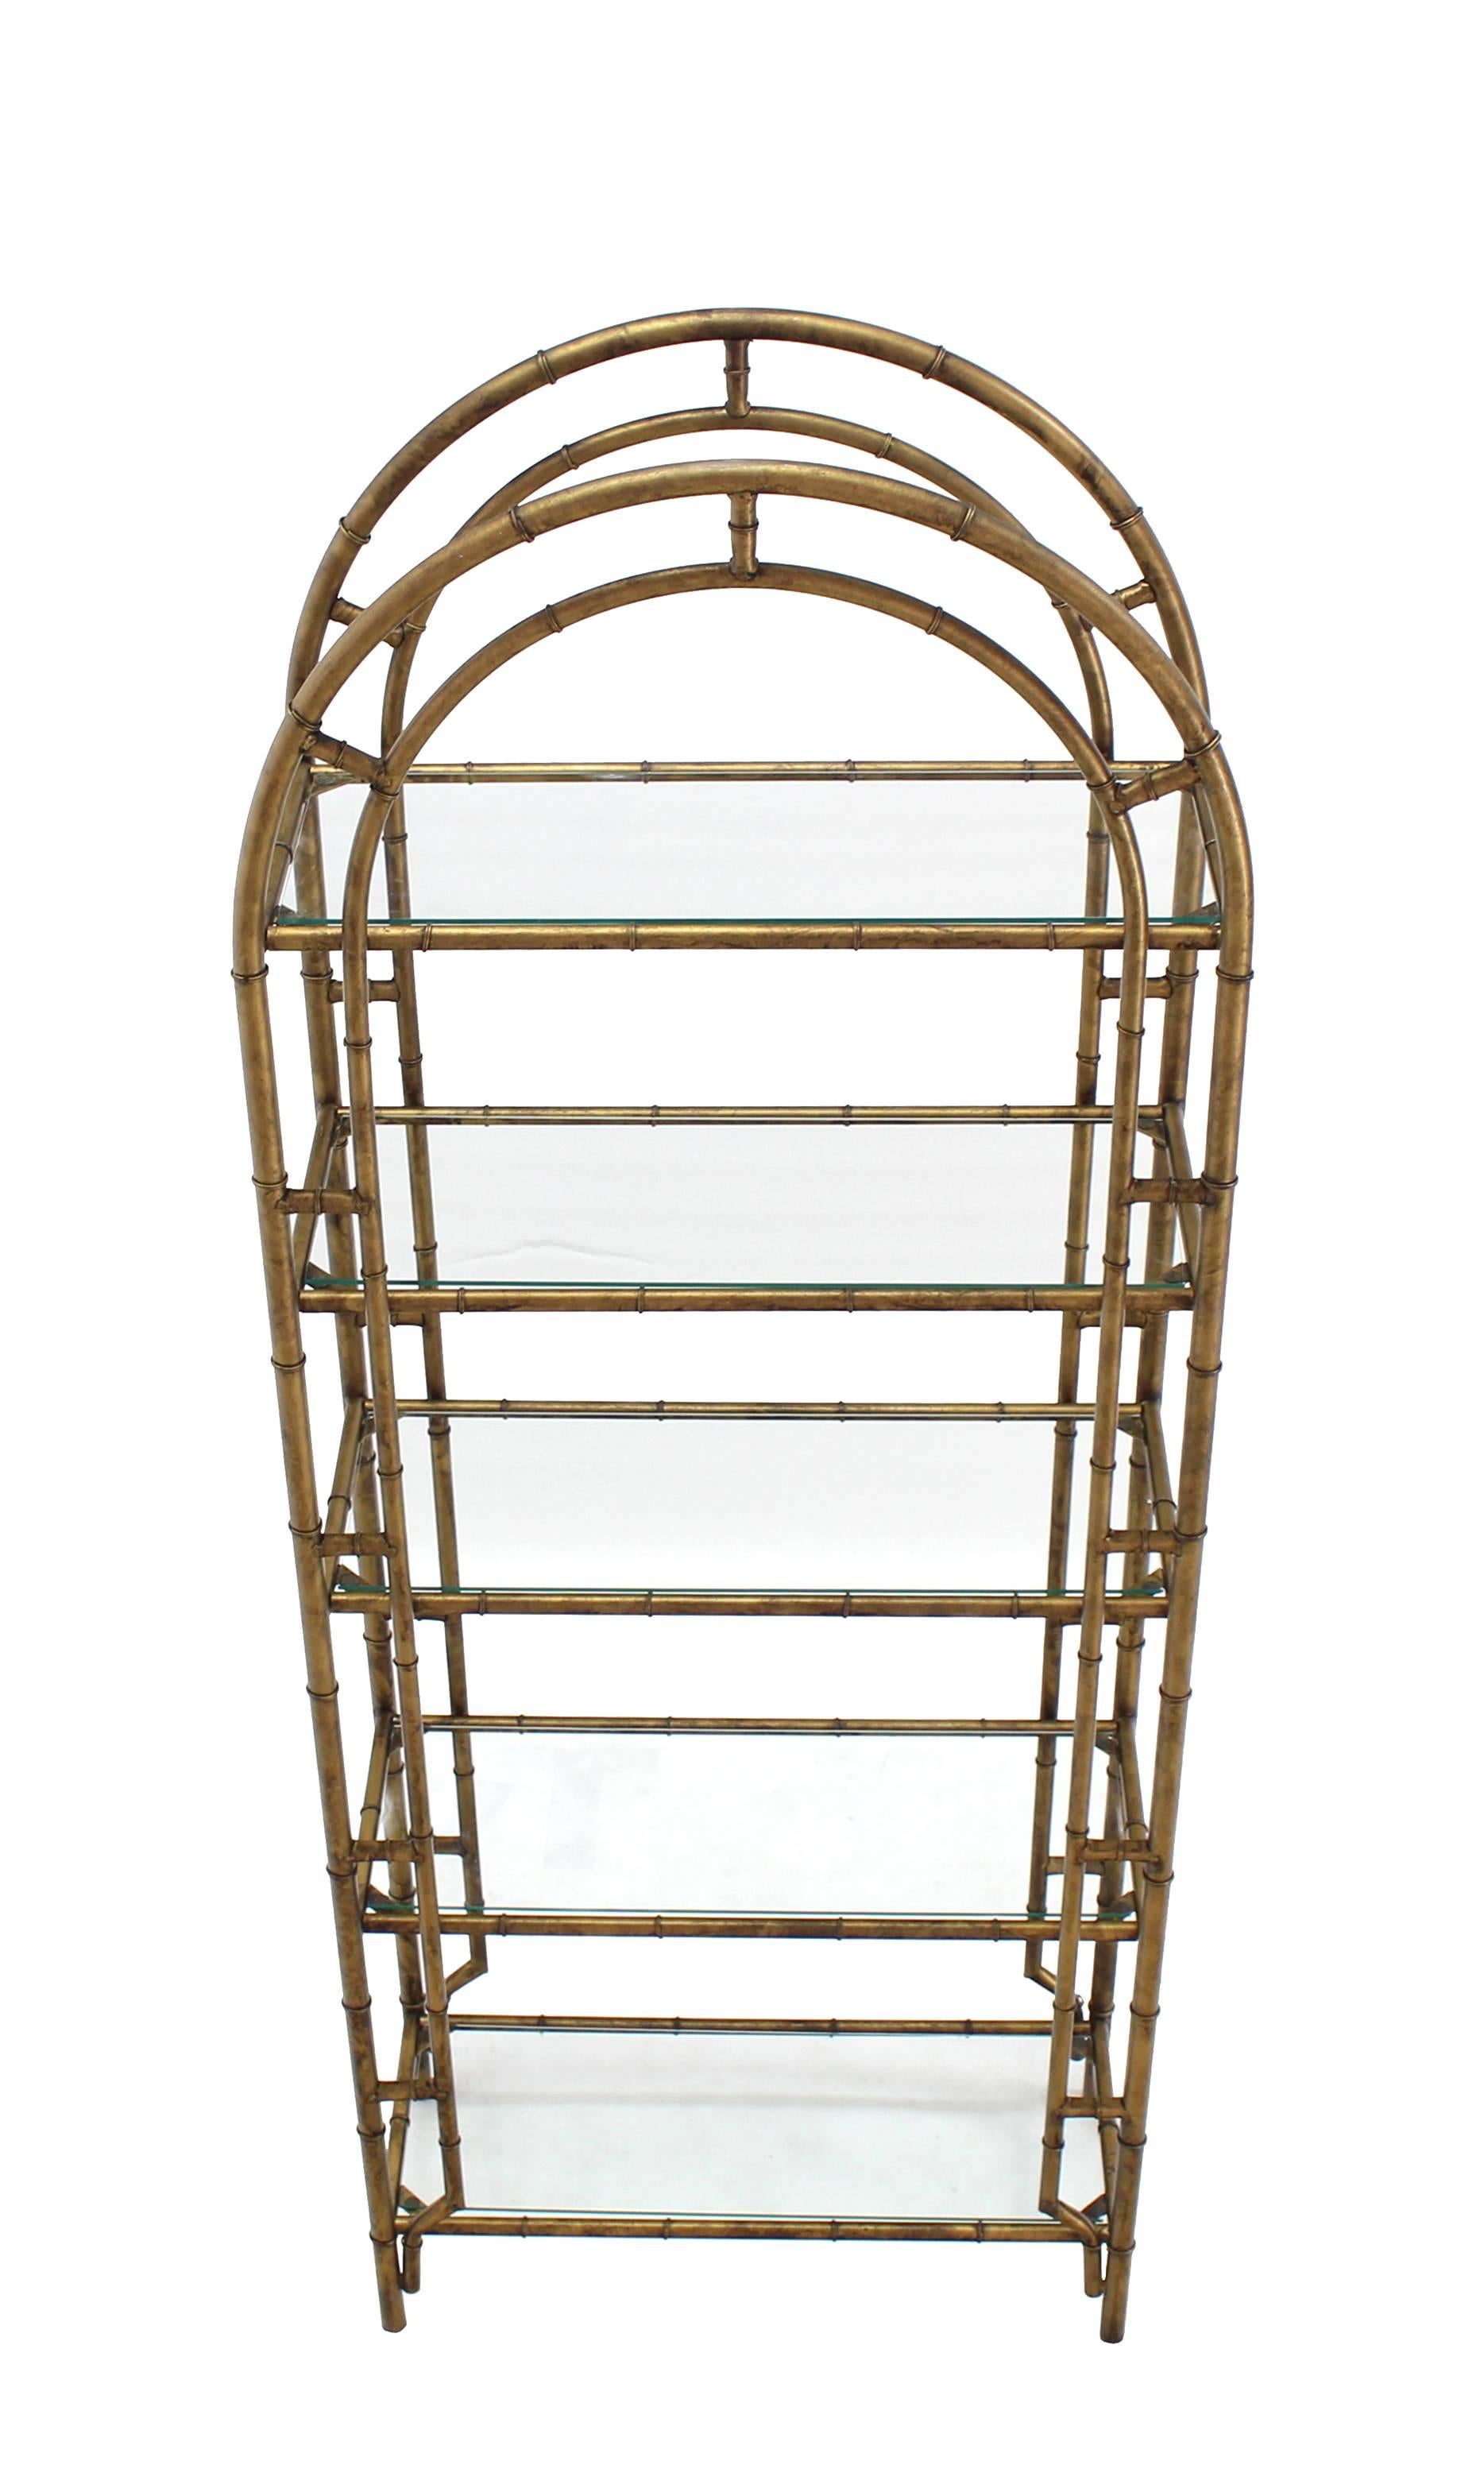 Very nice Mid-Century Modern faux bamboo glass shelves etagere.